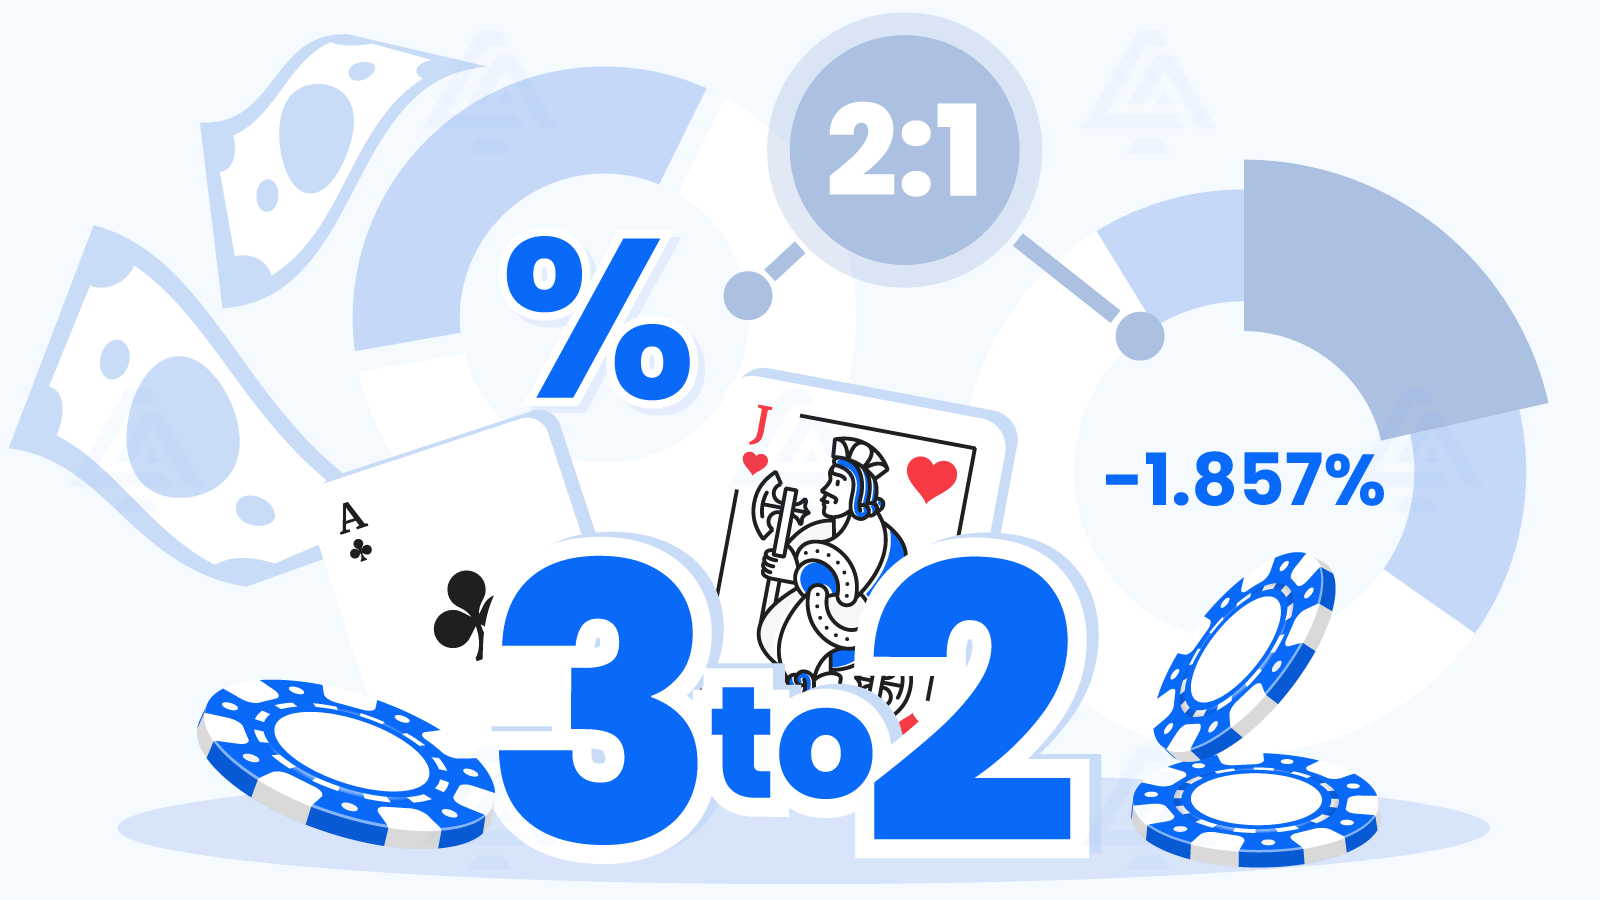 Tilt the Odds in Your Favor with 32 Payouts